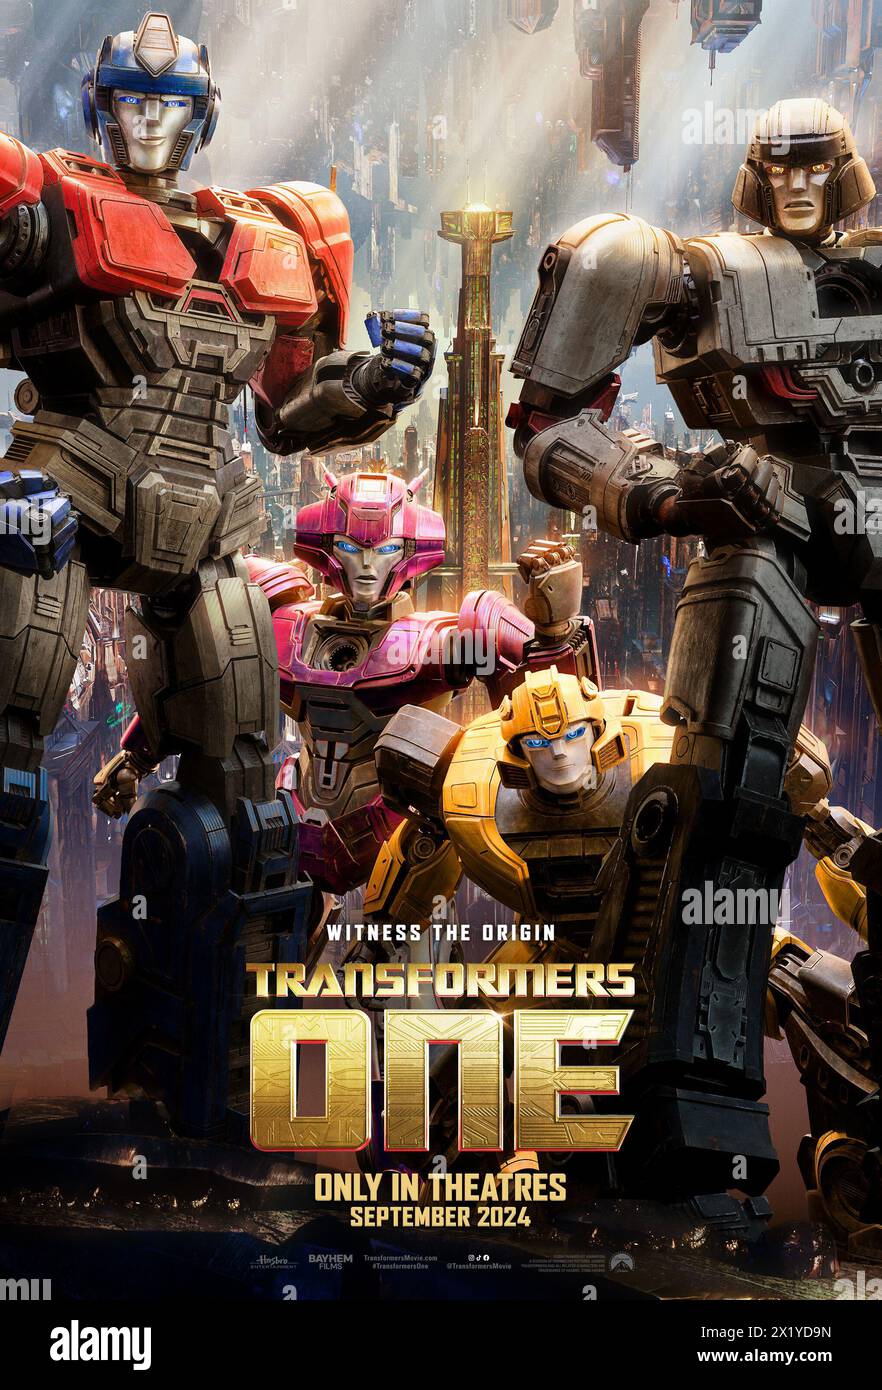 RELEASE DATE: September 20, 2024. TITLE: Transformers One. STUDIO: Paramount Animation. DIRECTOR: Josh Cooley. PLOT: The untold origin story of Optimus Prime and Megatron, better known as sworn enemies, but once were friends bonded like brothers who changed the fate of Cybertron forever. STARRING: L-r, Brian Tyree Henry (D-16), Keegan-Michael Key (B-127), Scarlett Johansson (Elita-1) and Chris Hemsworth (Orion Pax) poster art. (Credit Image: © Paramount Animation/Entertainment Pictures/ZUMAPRESS.com) EDITORIAL USAGE ONLY! Not for Commercial USAGE! Stock Photo